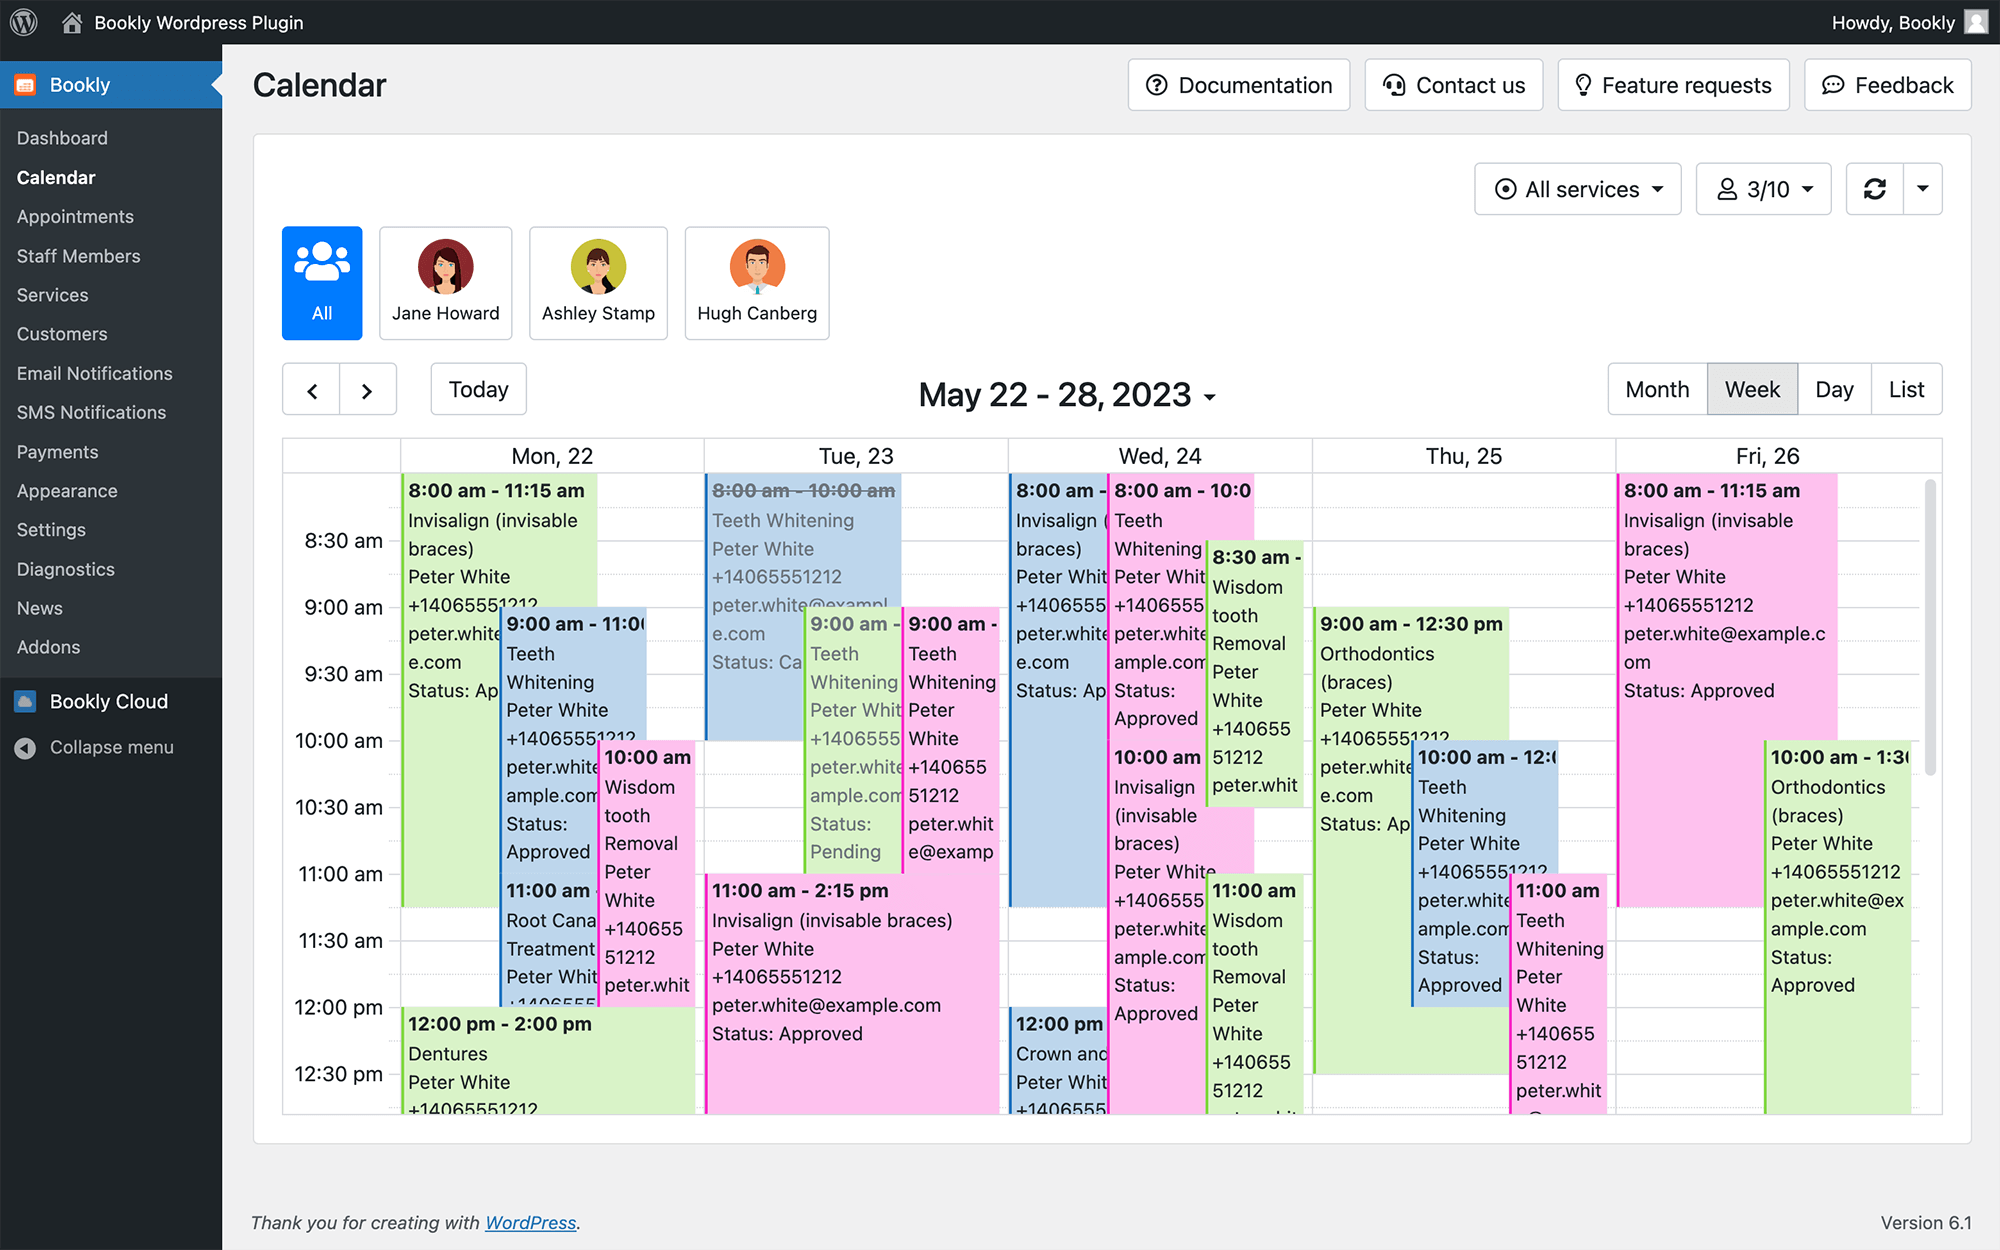 View calendar in daily/weekly/monthly modes in Bookly